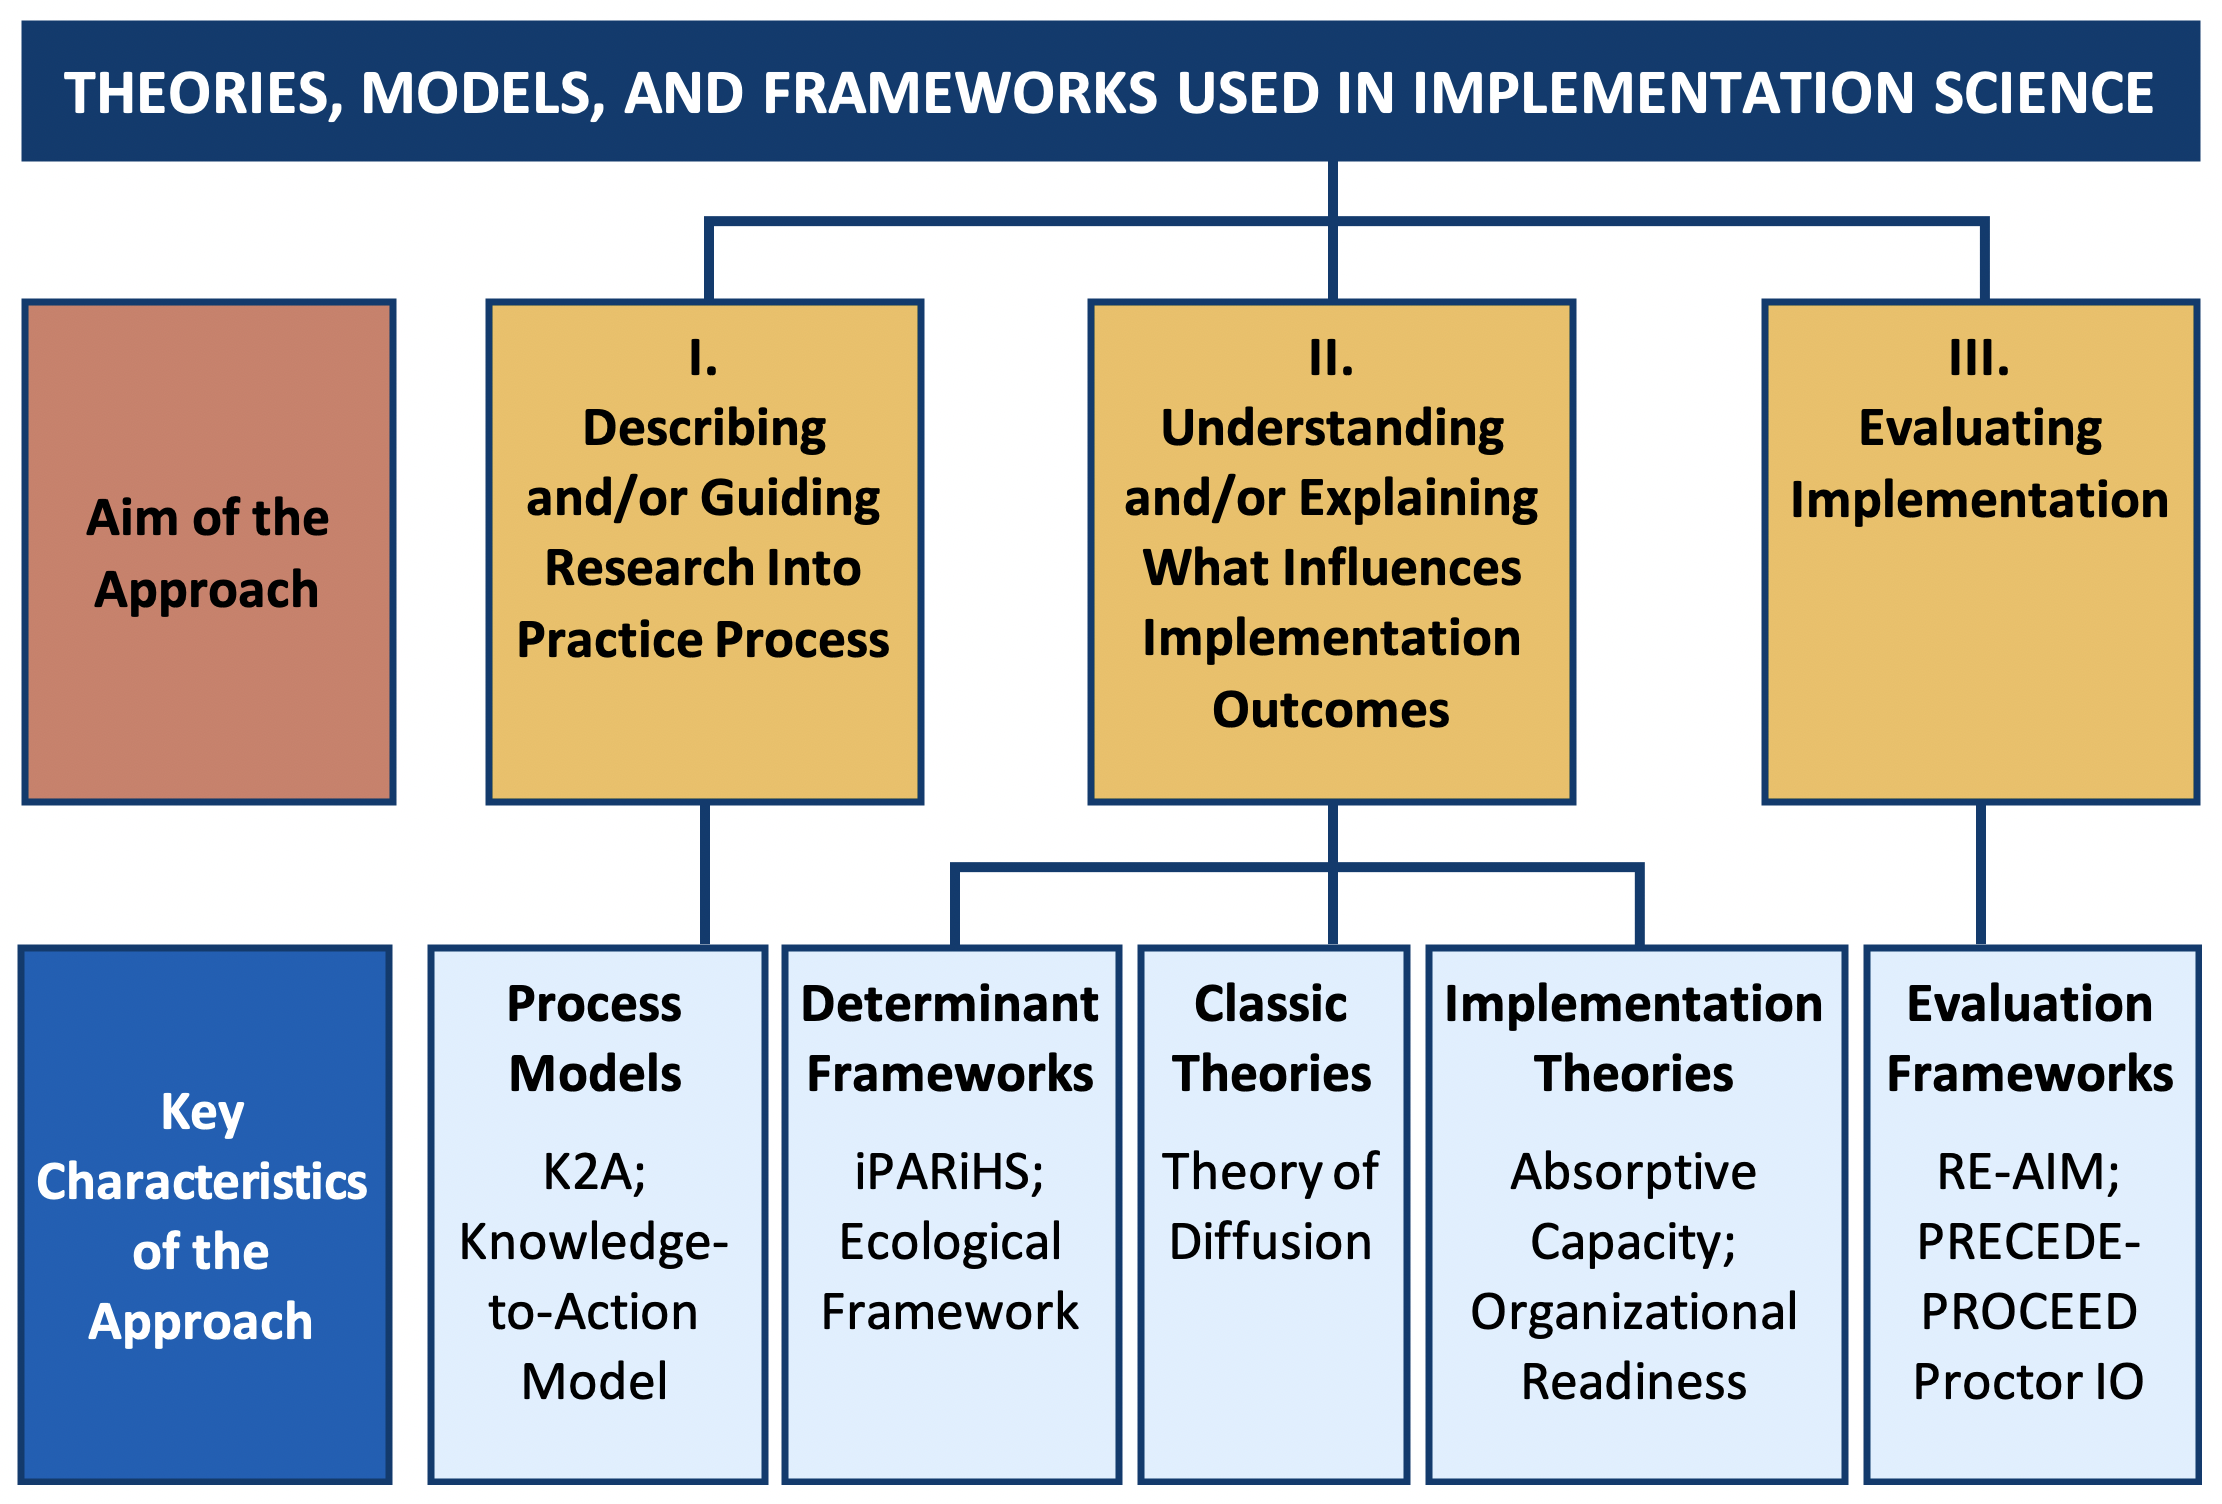 Theories, Models, and Frameworks Used in Implementation Science